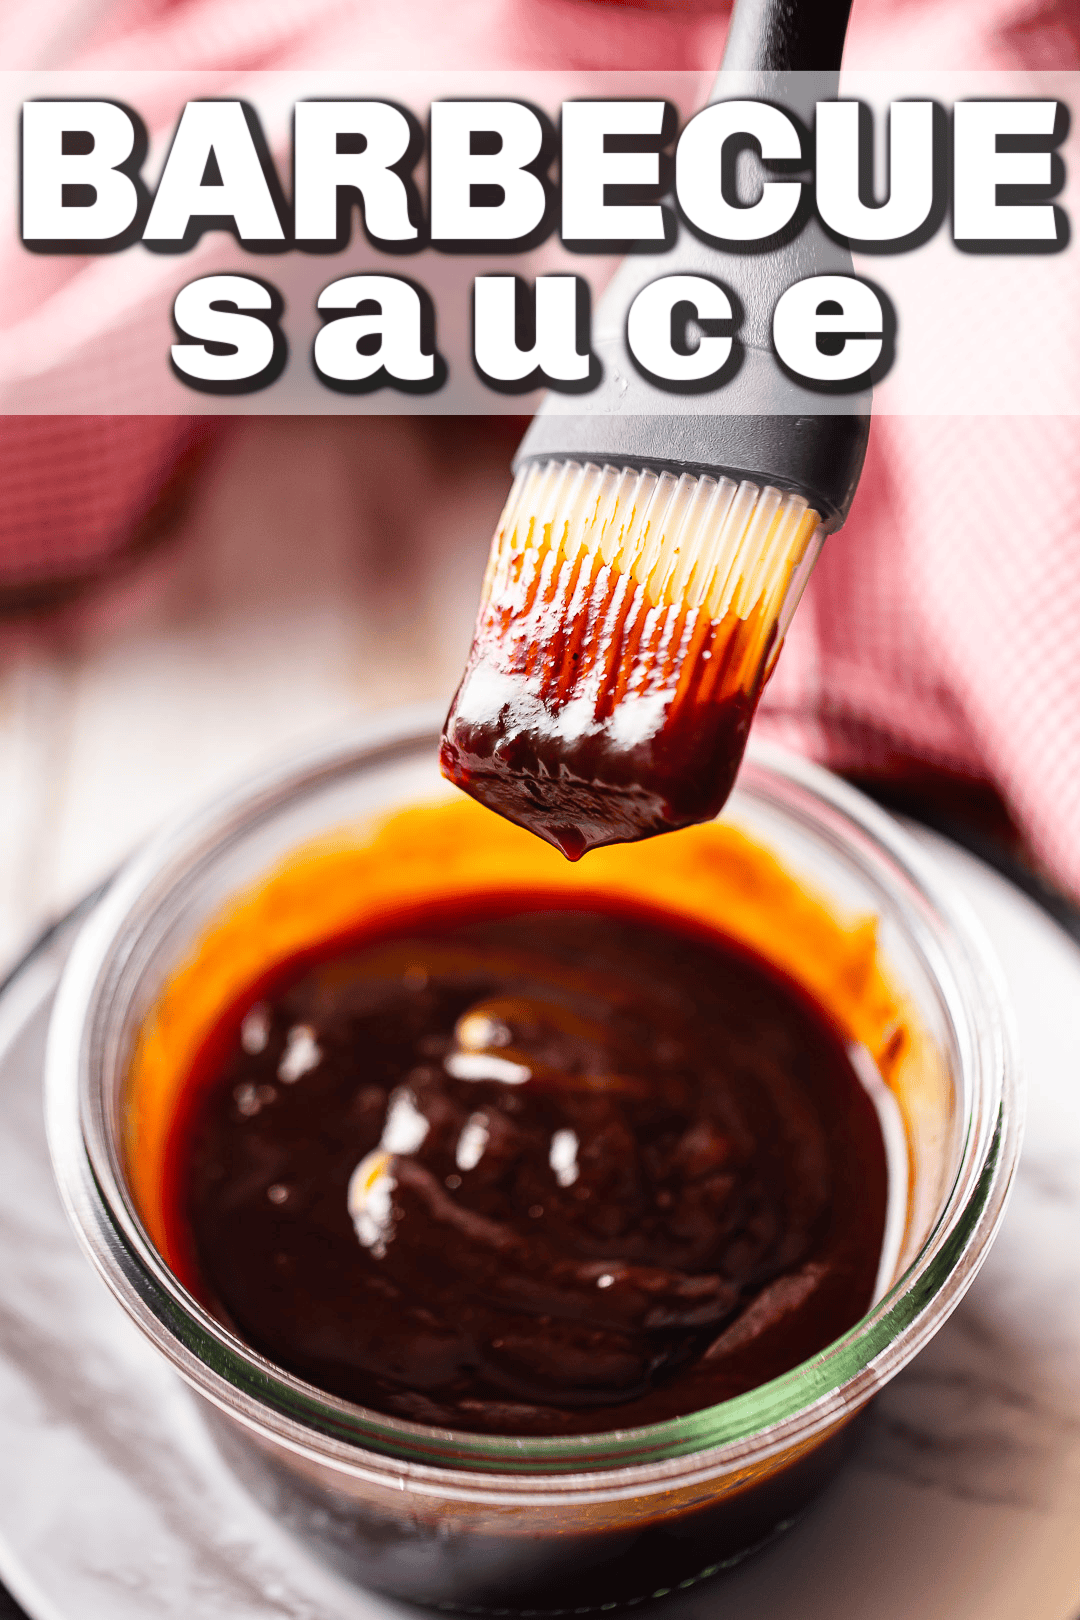 Barbecue sauce recipe prepared and being picked up on a sauce brush.